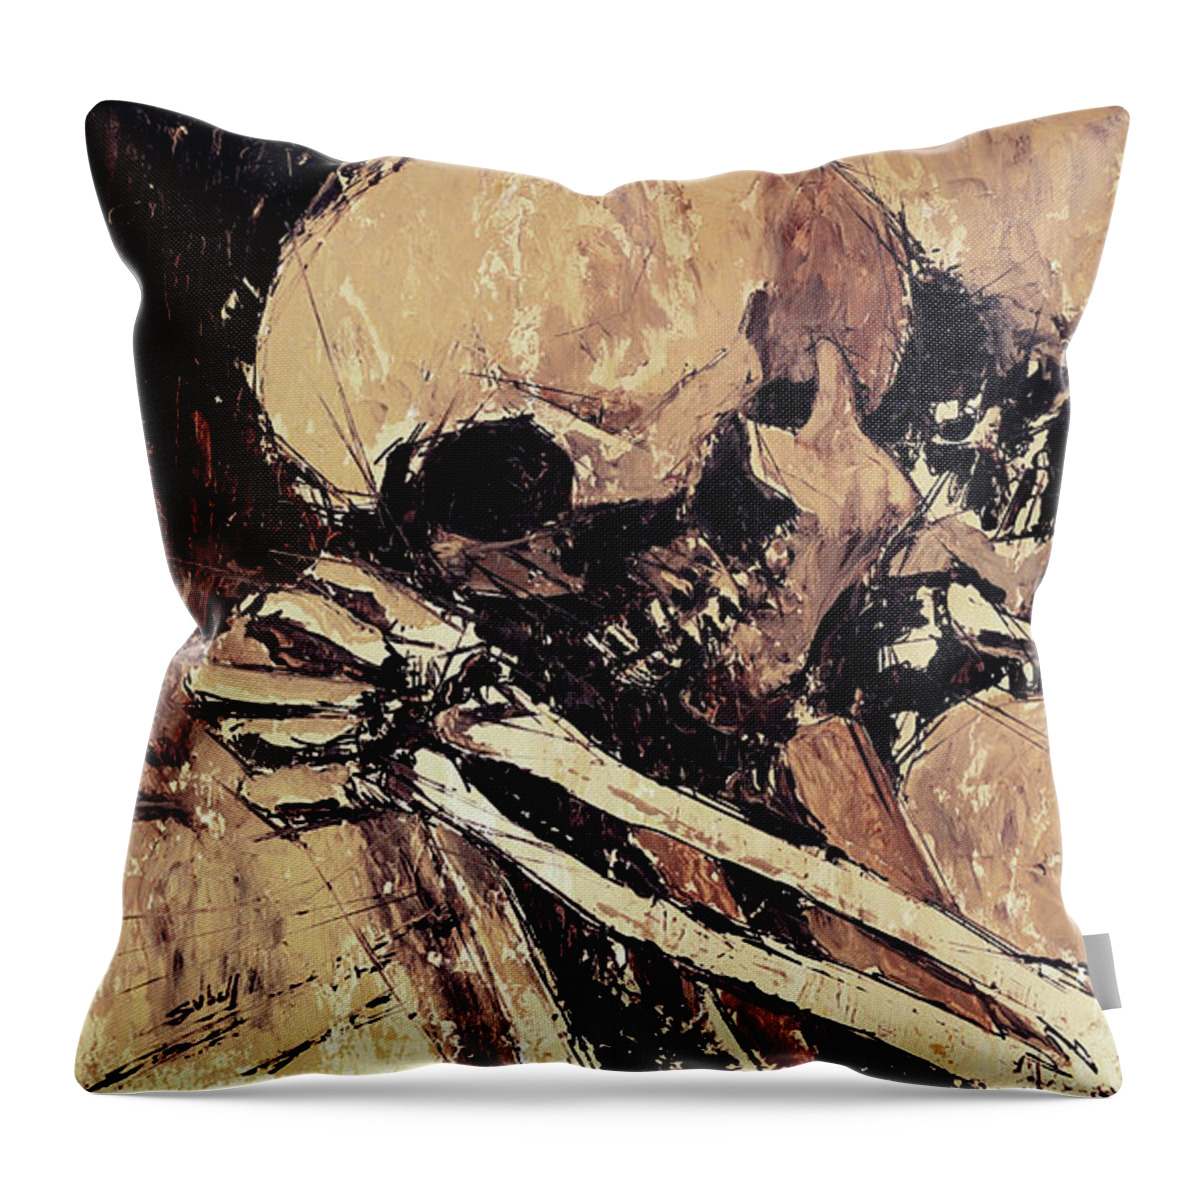 Praying Throw Pillow featuring the painting One Prayer Too Late by Sv Bell